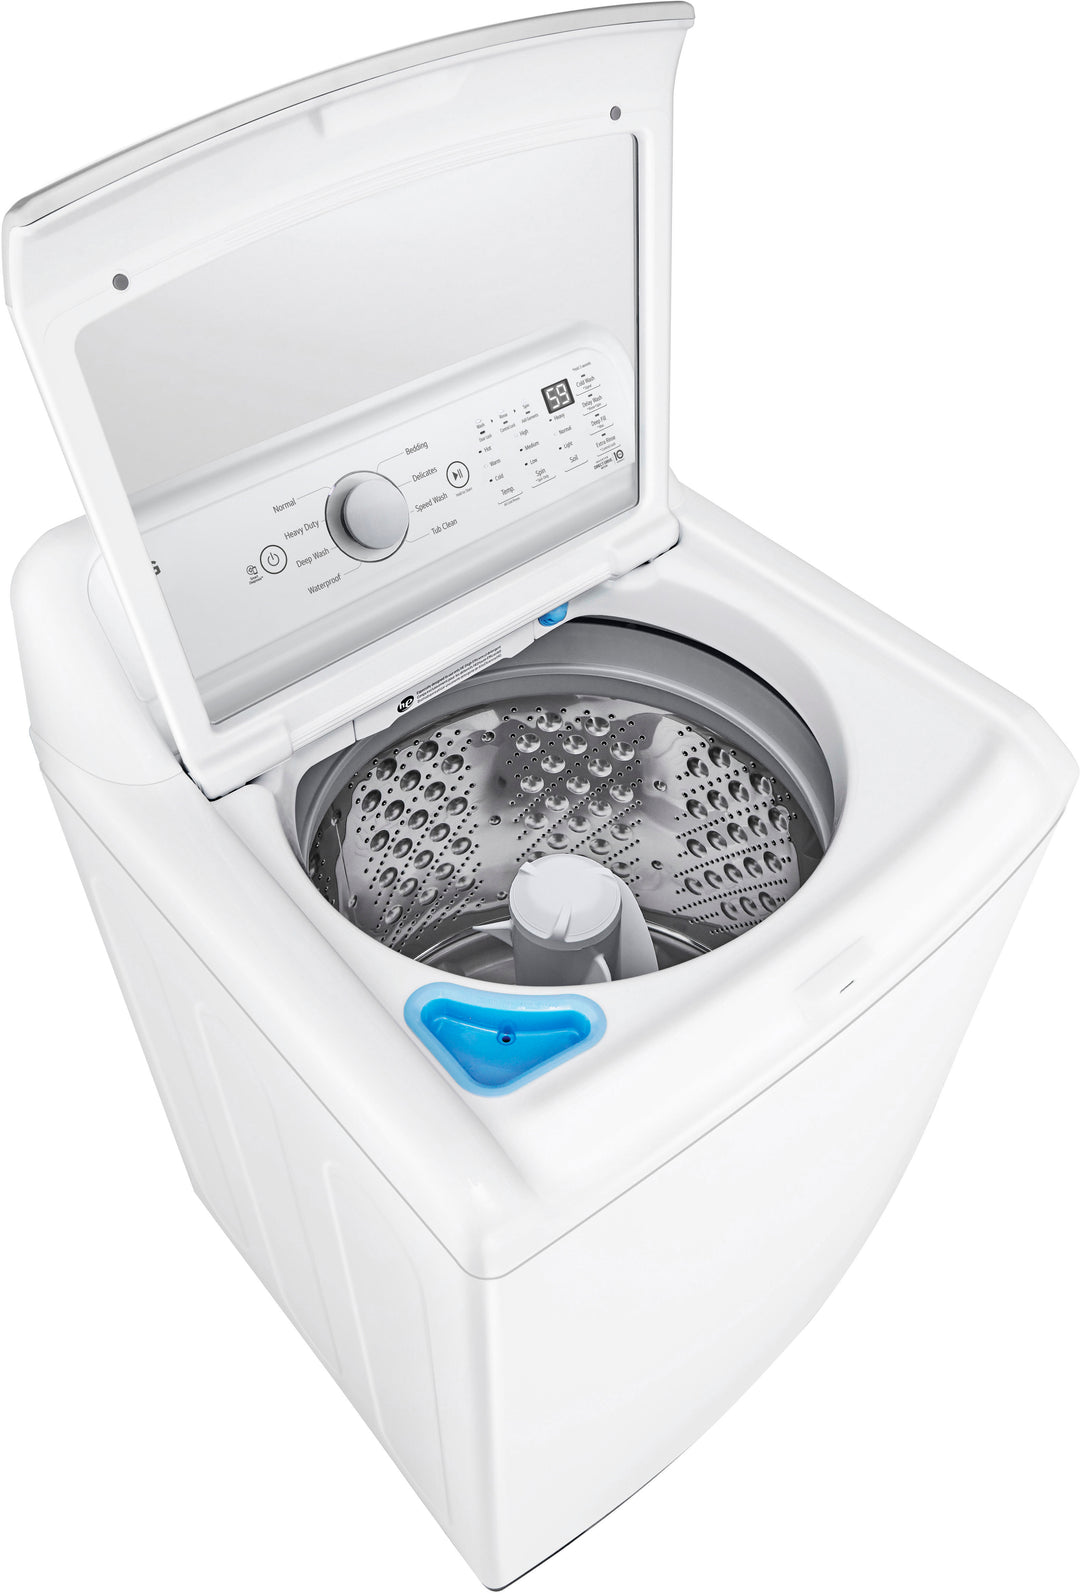 LG - 4.8 Cu. Ft. High-Efficiency Smart Top Load Washer with 4 Way Agitator and TurboDrum - White_9